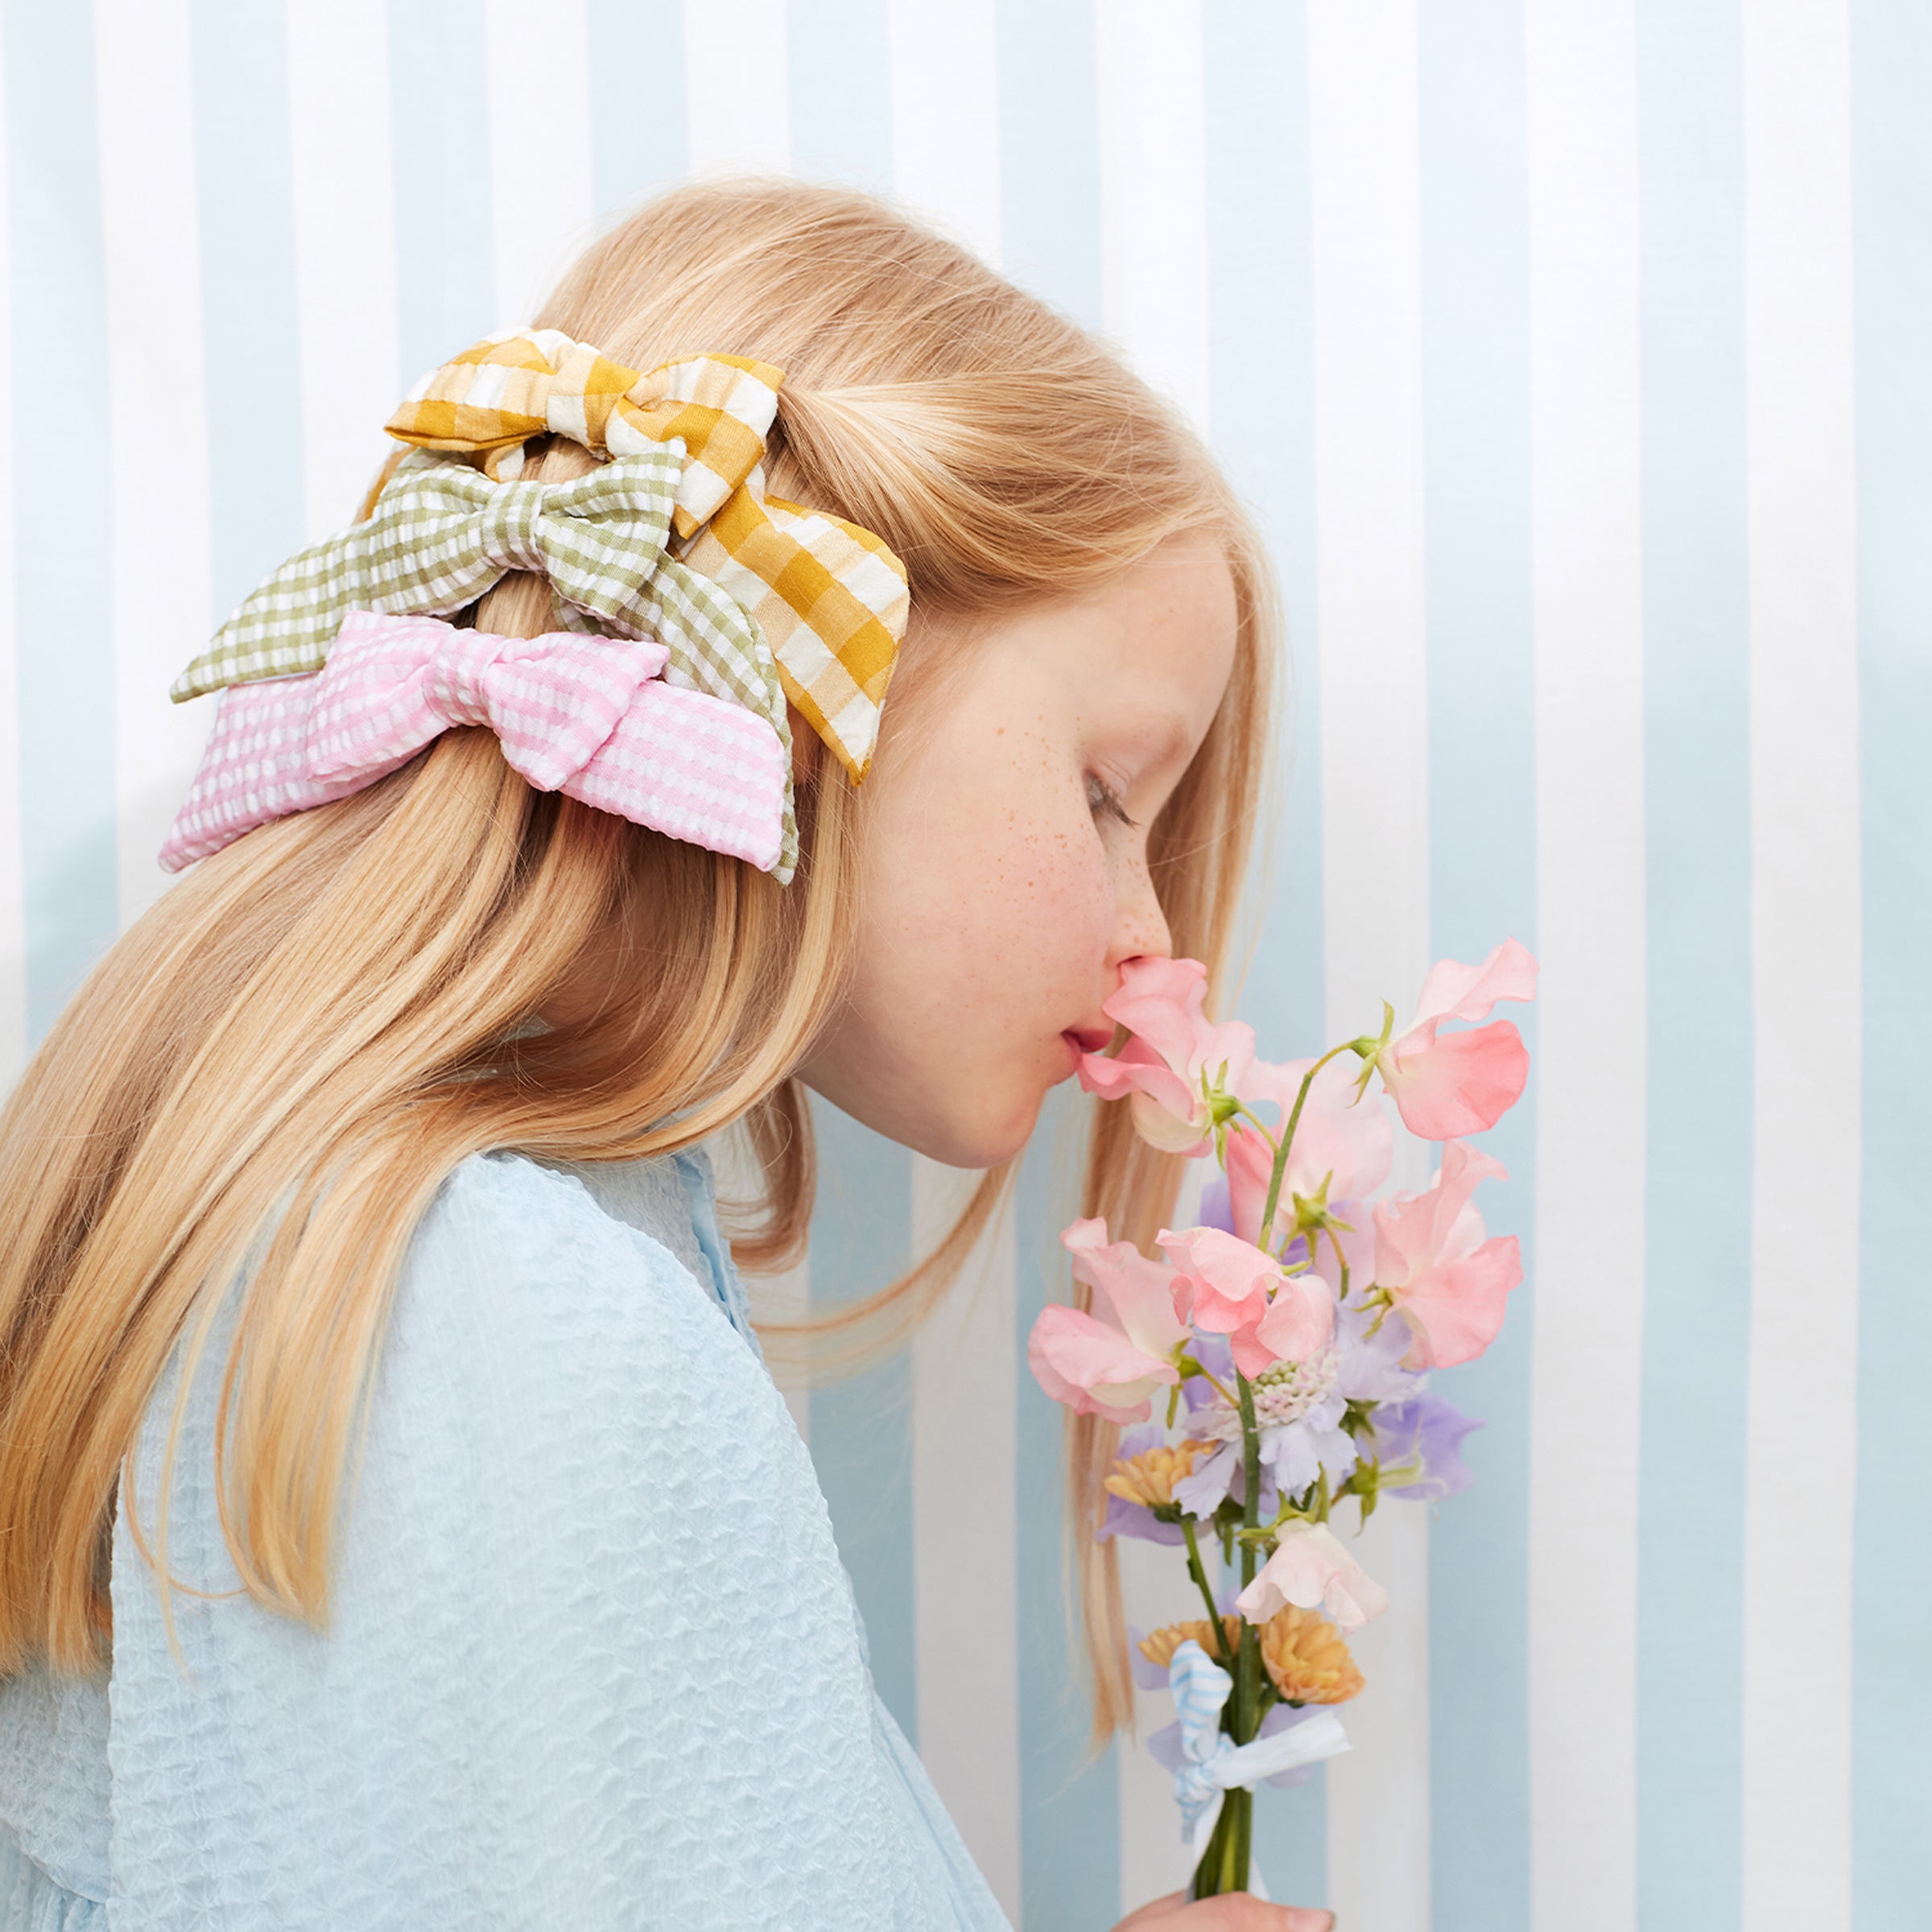 Our stylish kids gold hair clips, with gingham bows, make wonderful kids hair accessories.